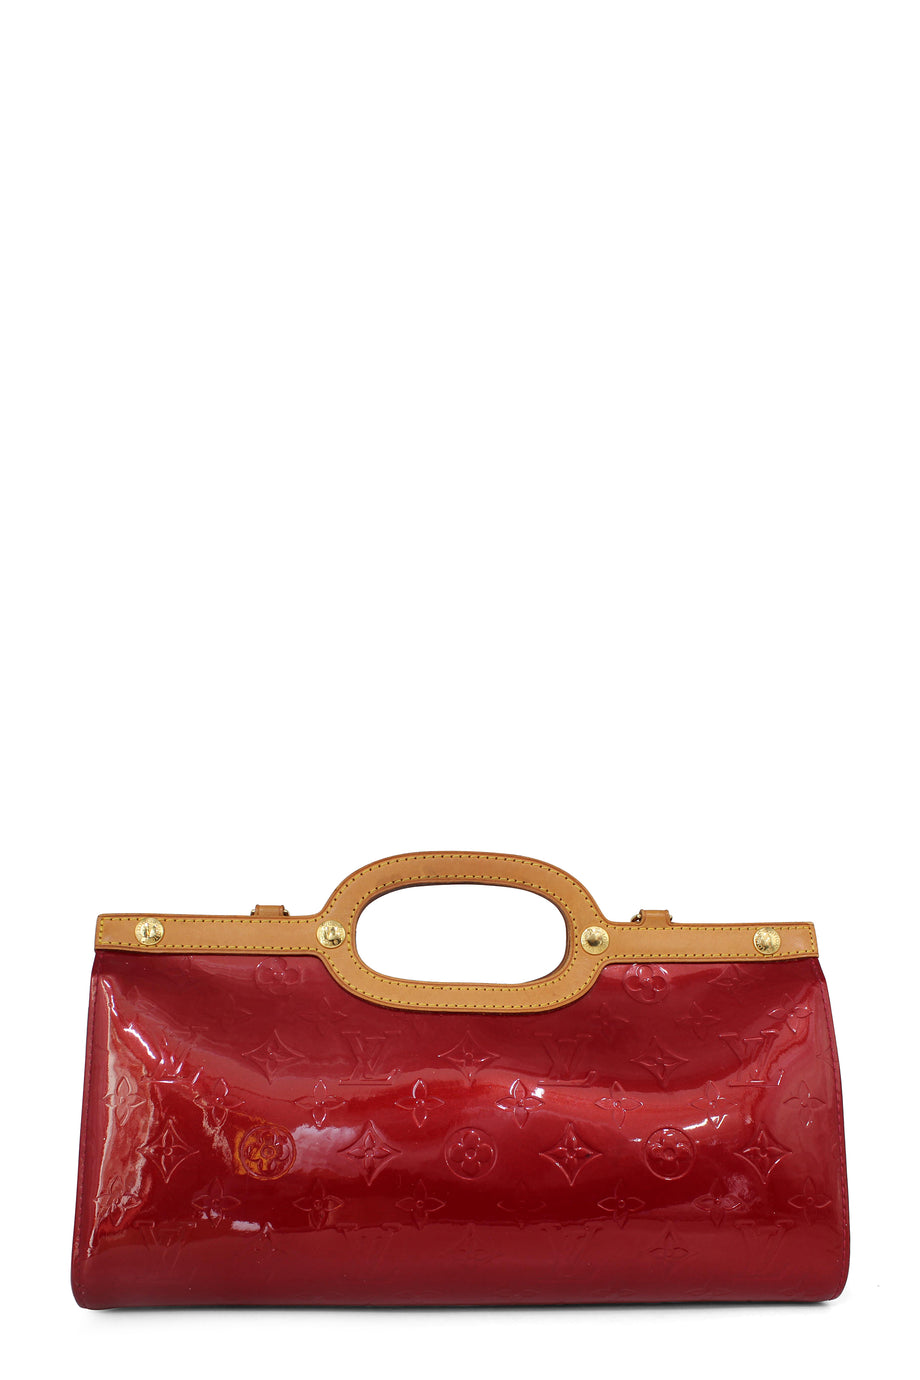 Buy Authentic Vernis Bags  Louis Vuitton from Second Edit by Style Theory